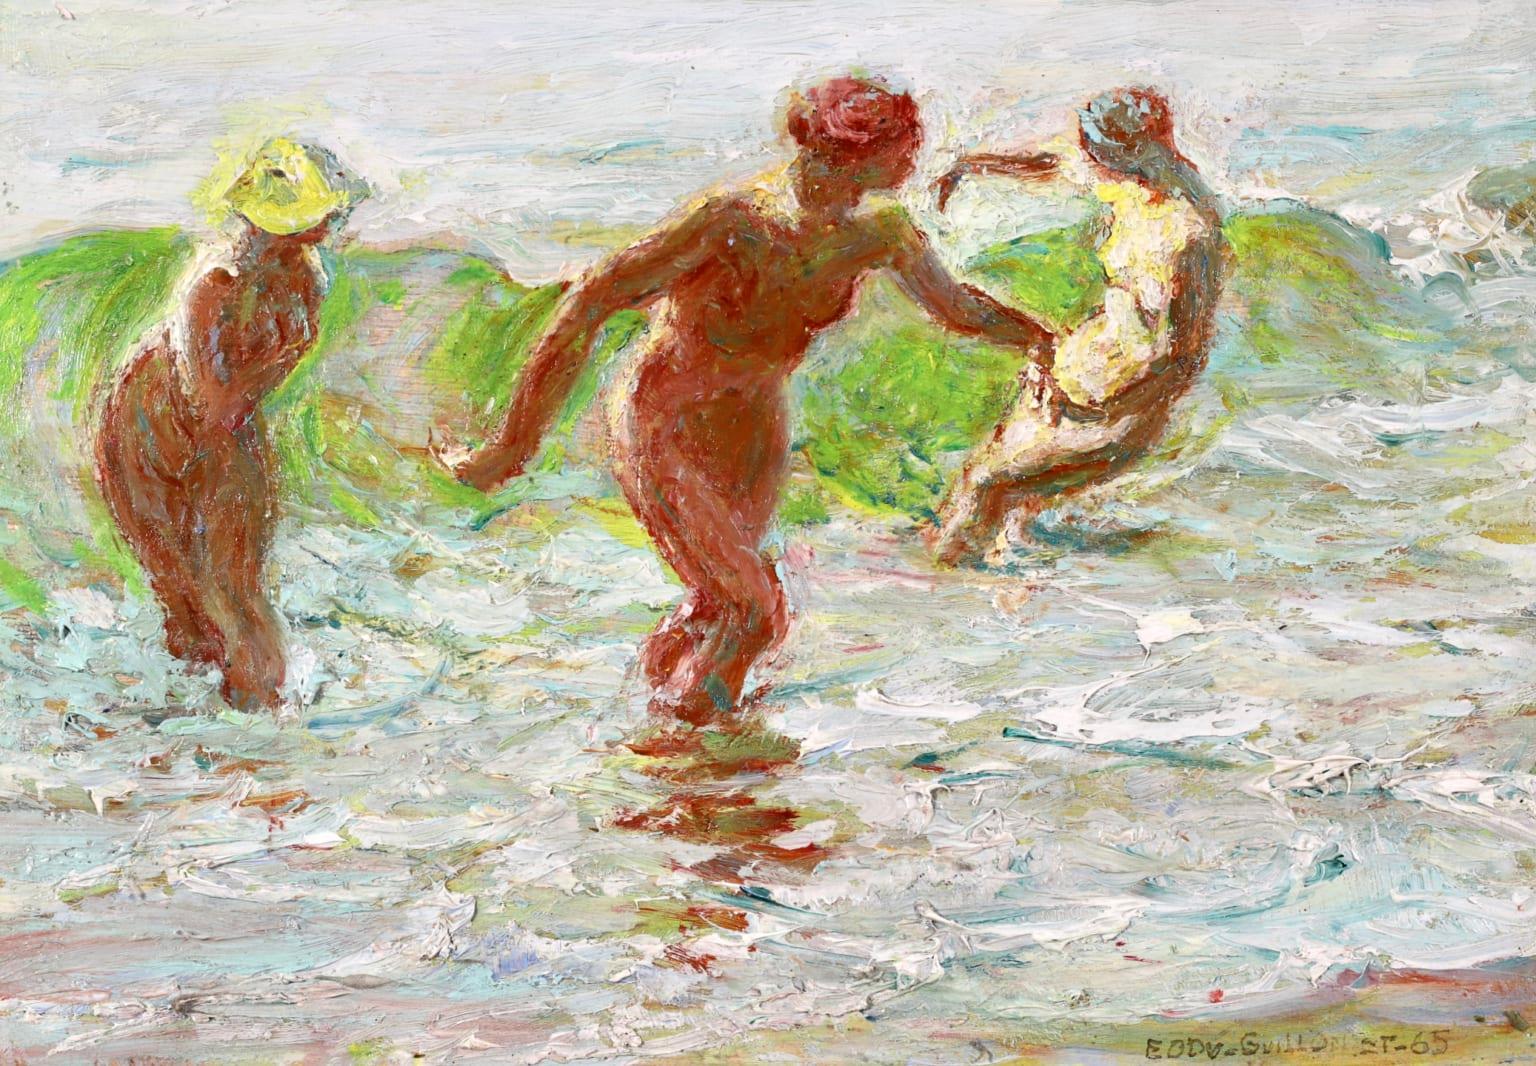 Bathers - Post Impressionist Oil, Nude Figures in Seascape by Octave Guillonnet 1